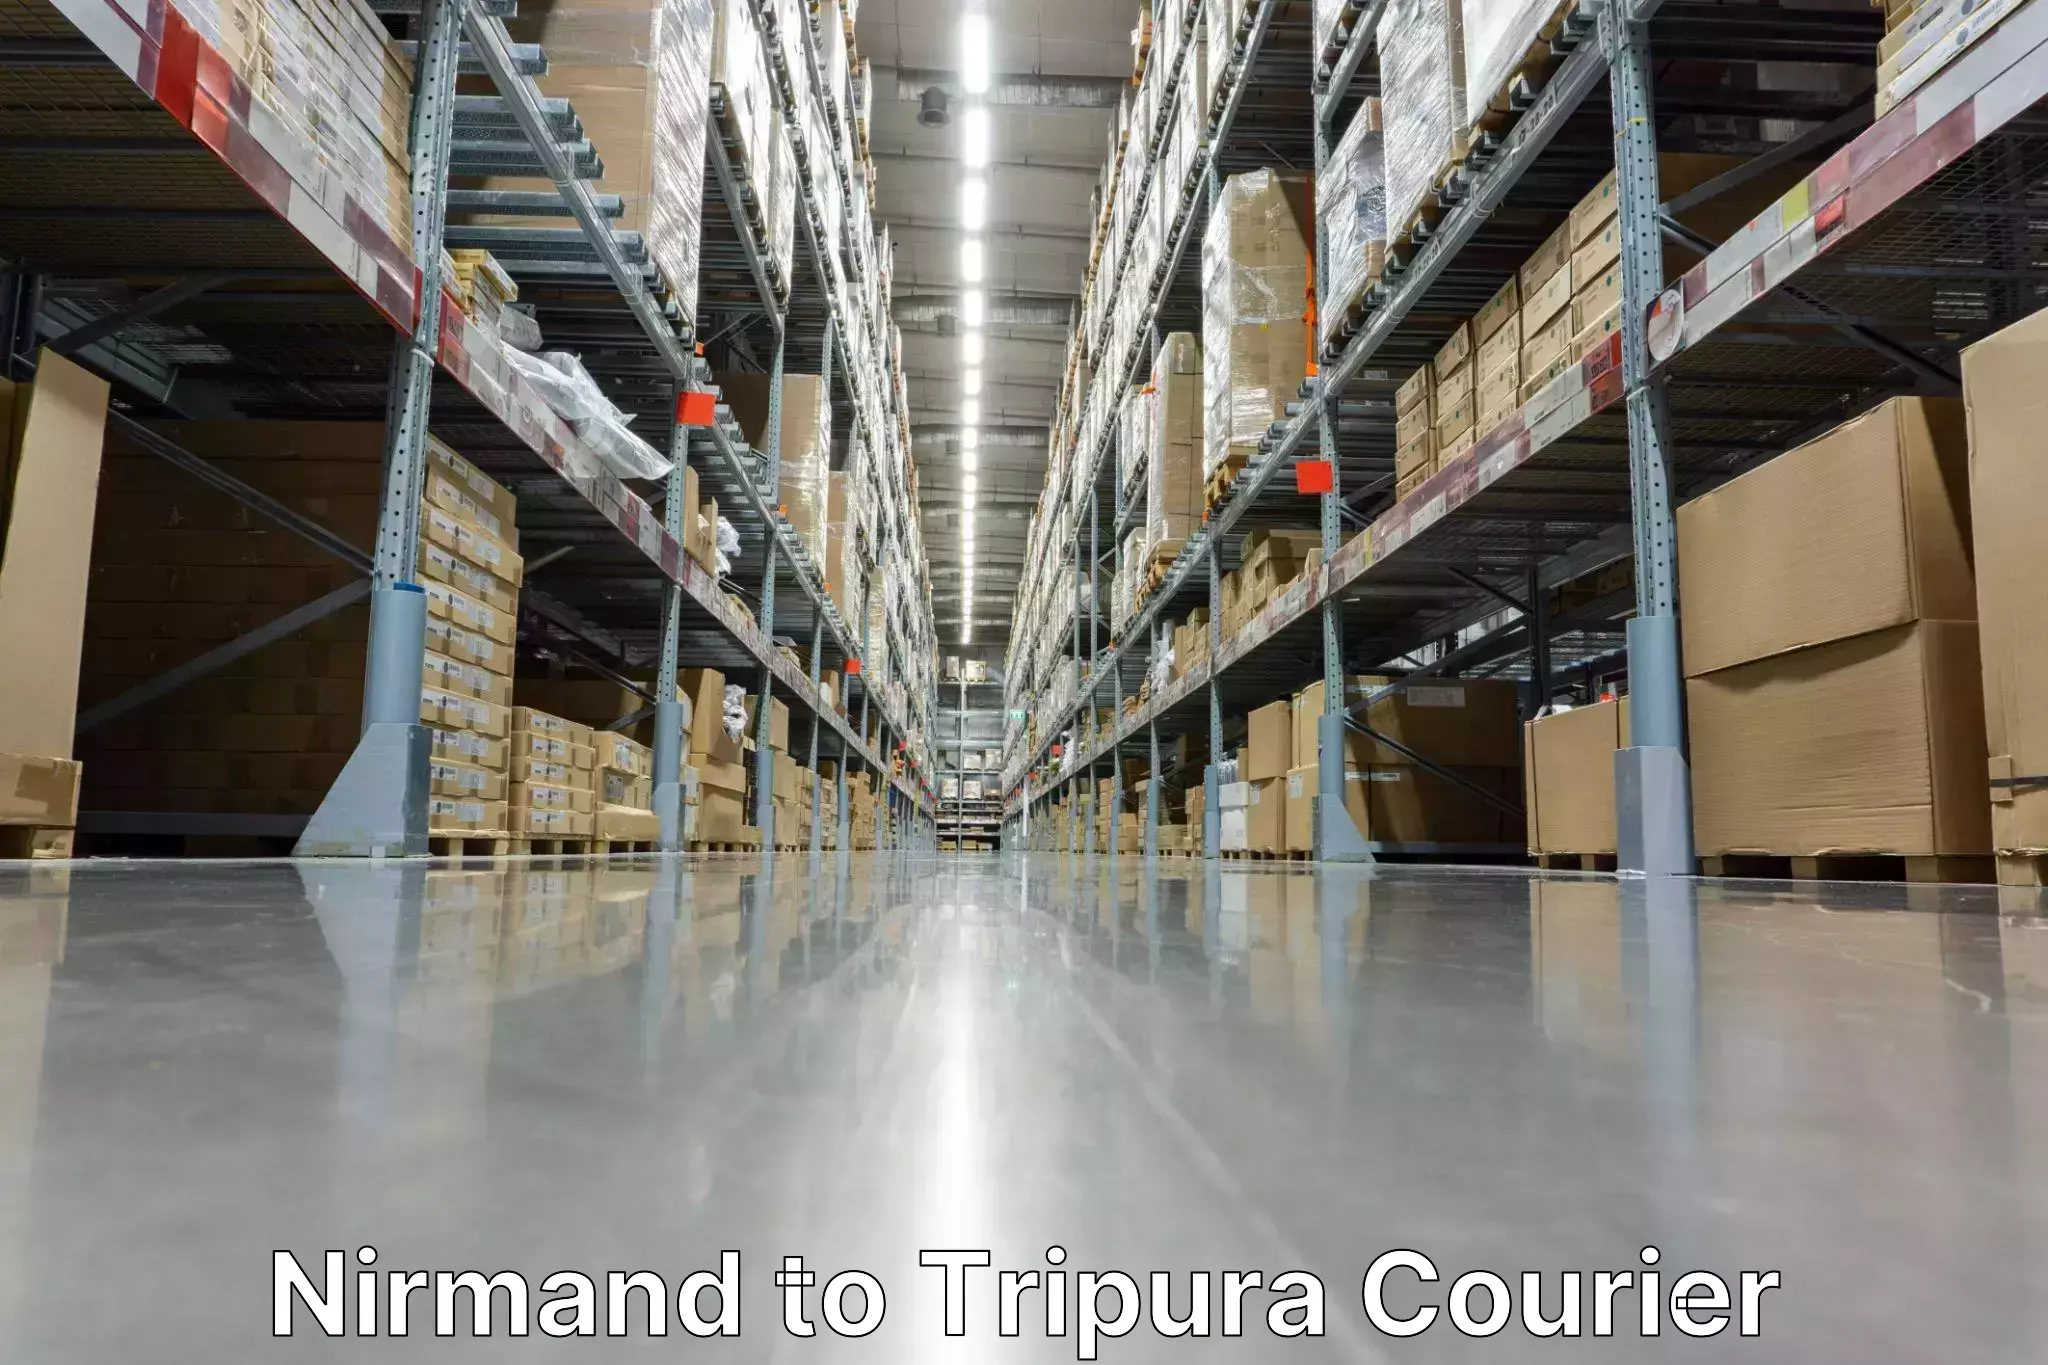 Online package tracking in Nirmand to Udaipur Tripura